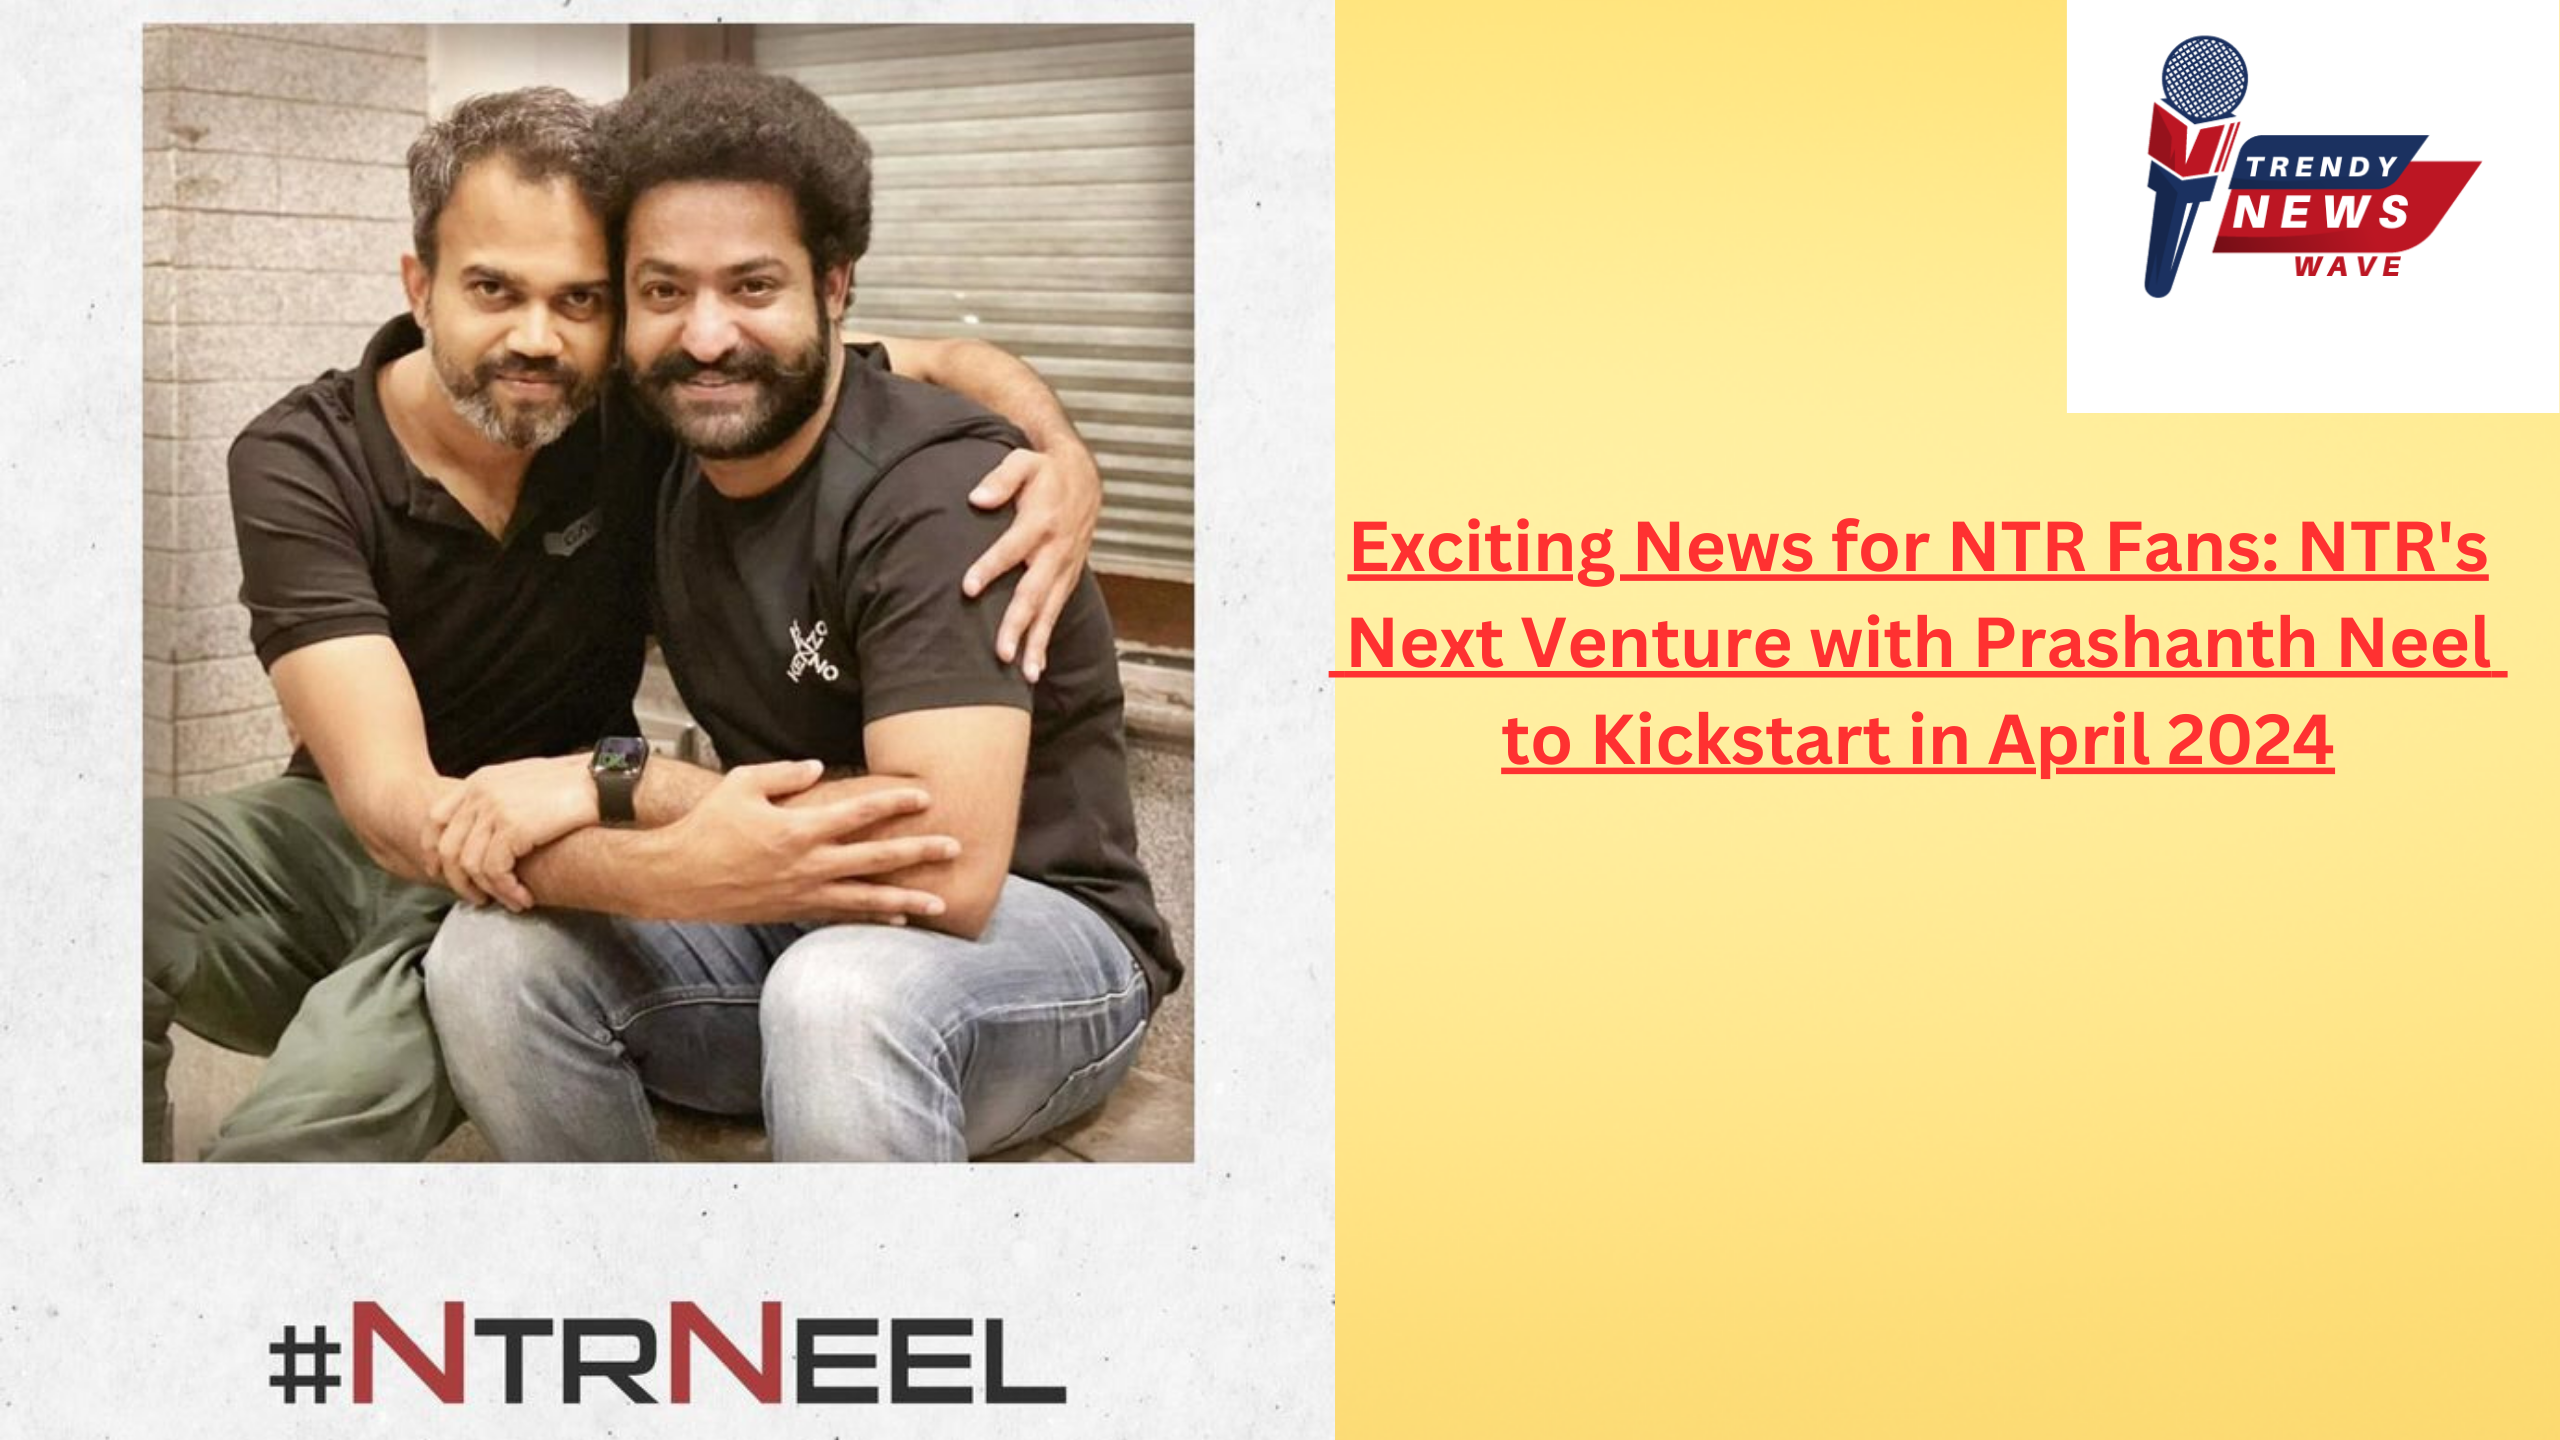 Exciting News for NTR Fans: NTR's Next Venture with Prashanth Neel to Kickstart in April 2024